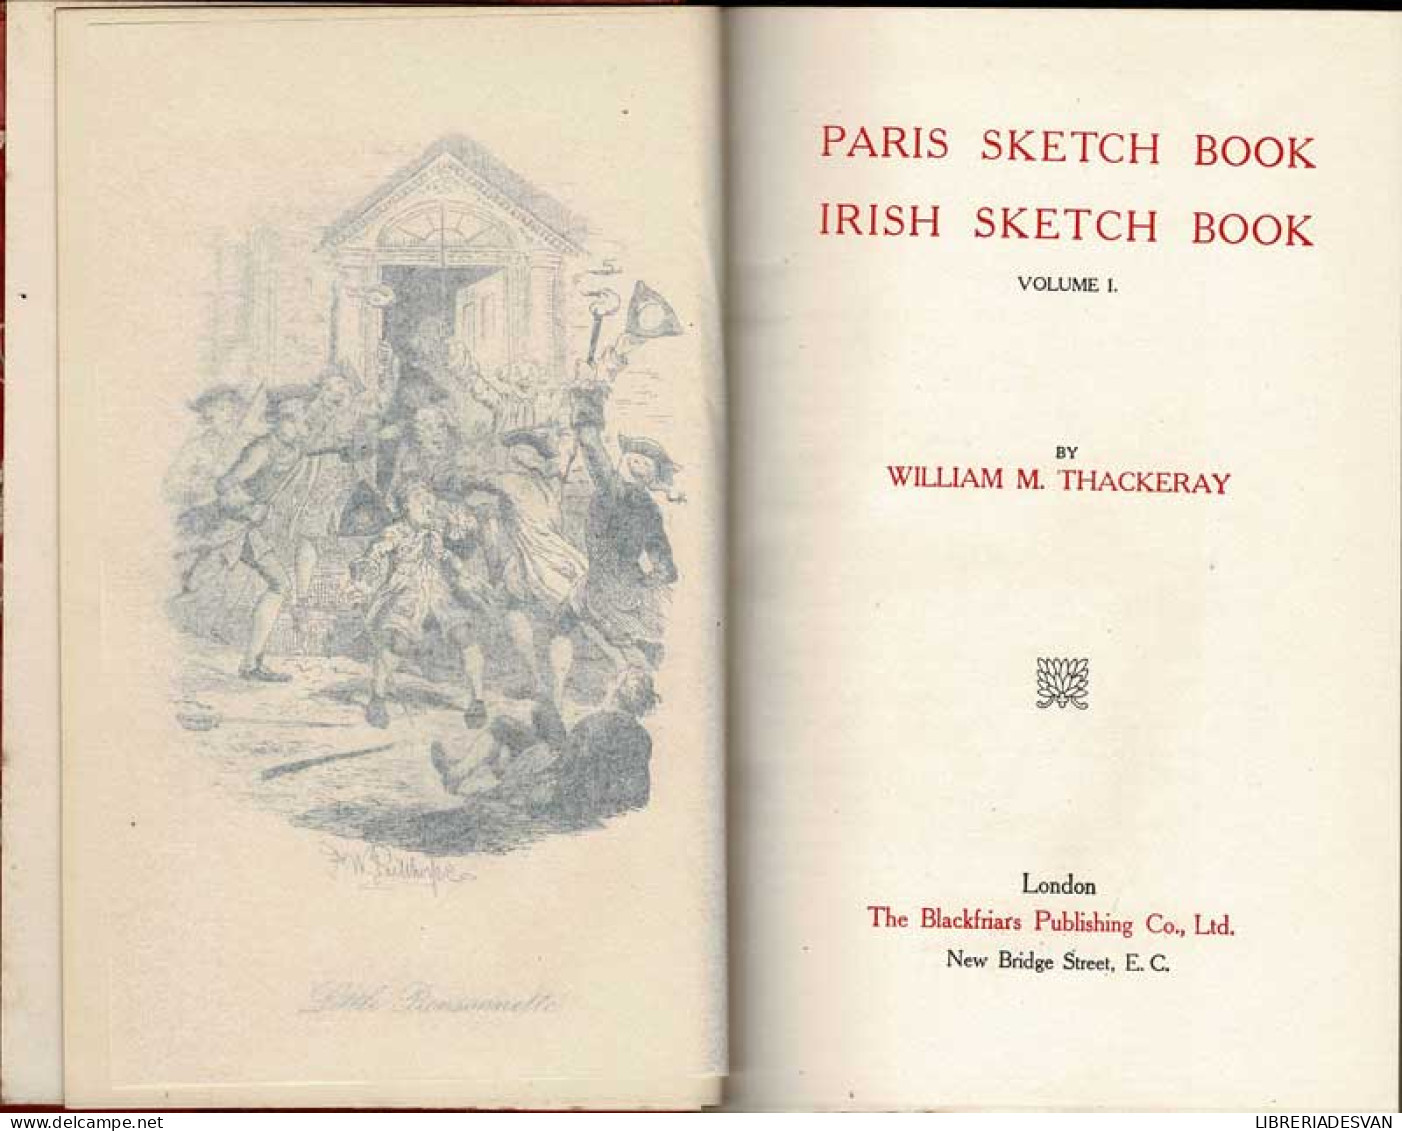 Paris Sketch Book. Irish Sketch Book. Character Sketches. Eastern Sketches - William Makepeace Thackeray - Philosophy & Psychologie